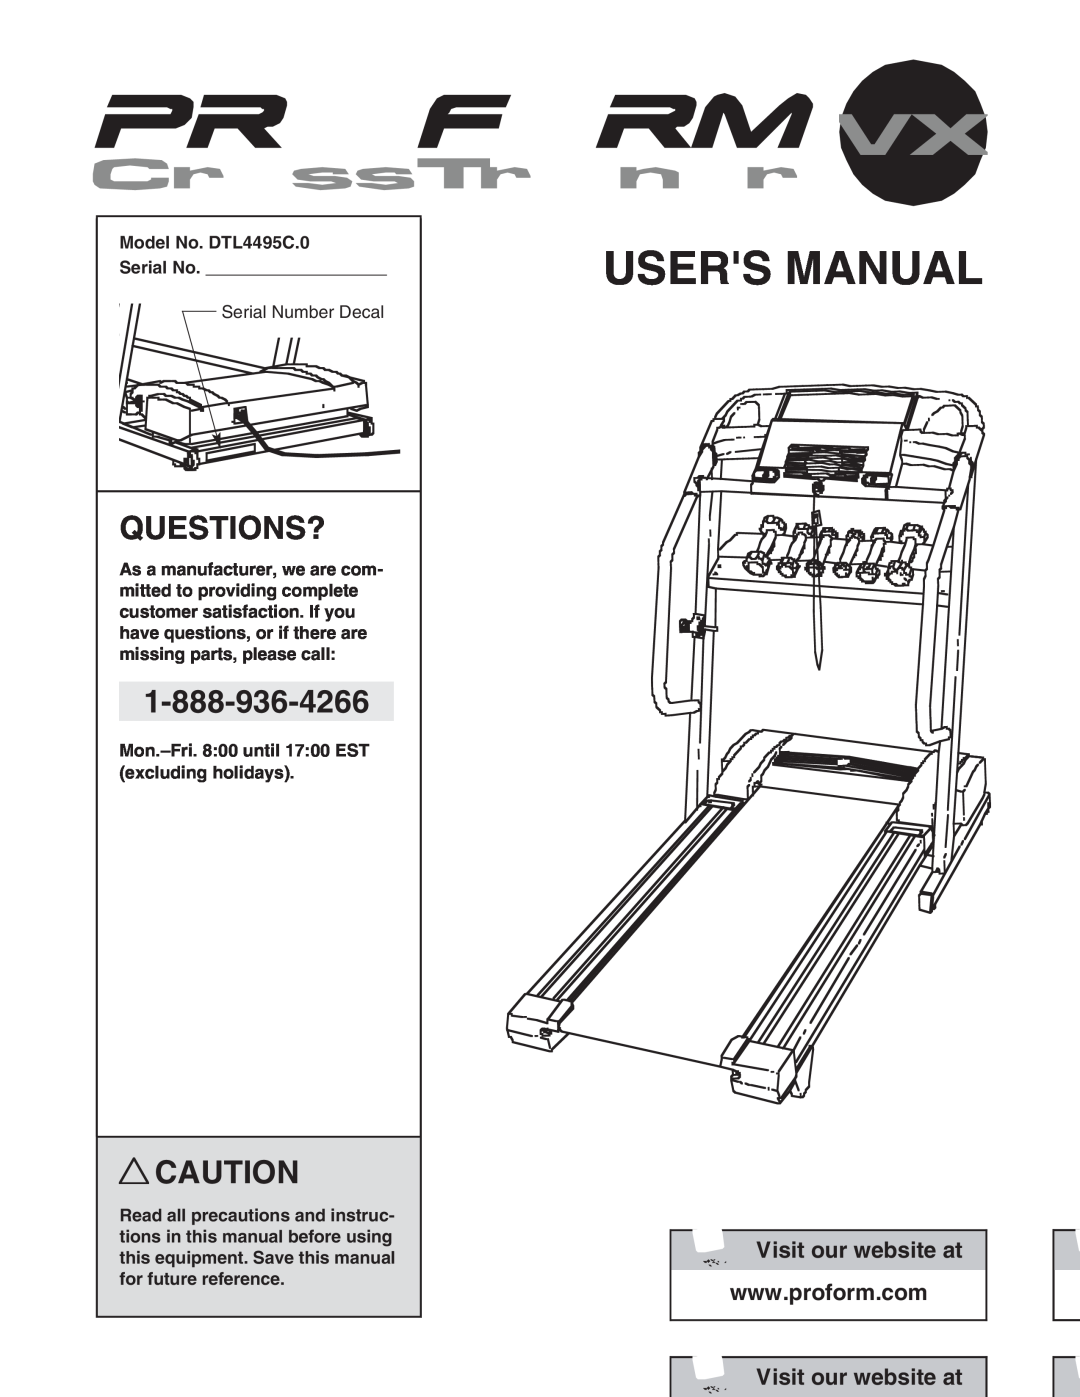 ProForm DTL4495C.0 user manual Questions?, Users Manual, Visit our website at 